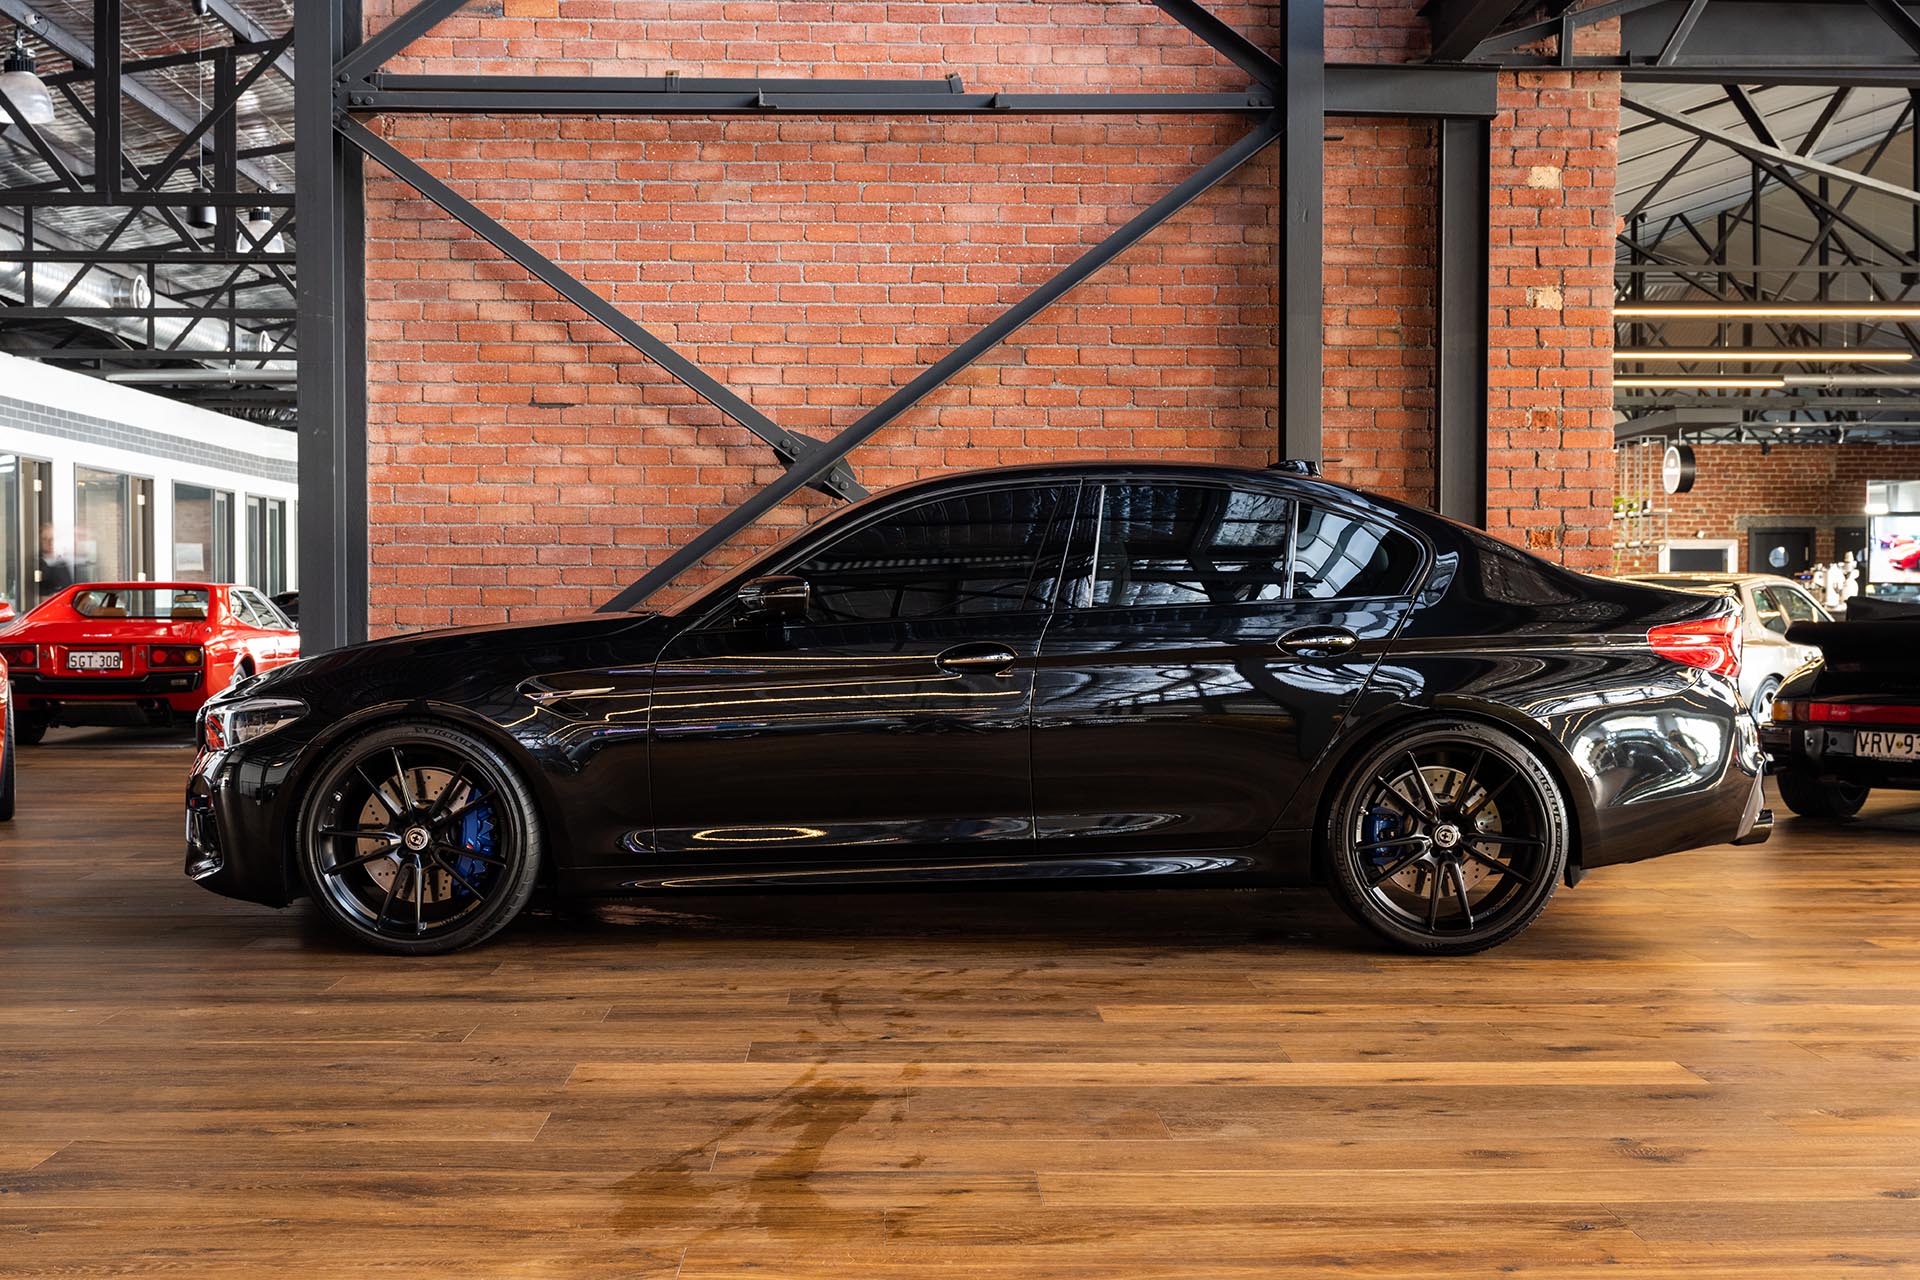 2018 Bmw F90 M5 Launch Edition - Richmonds - Classic And Prestige Cars -  Storage And Sales - Adelaide, Australia